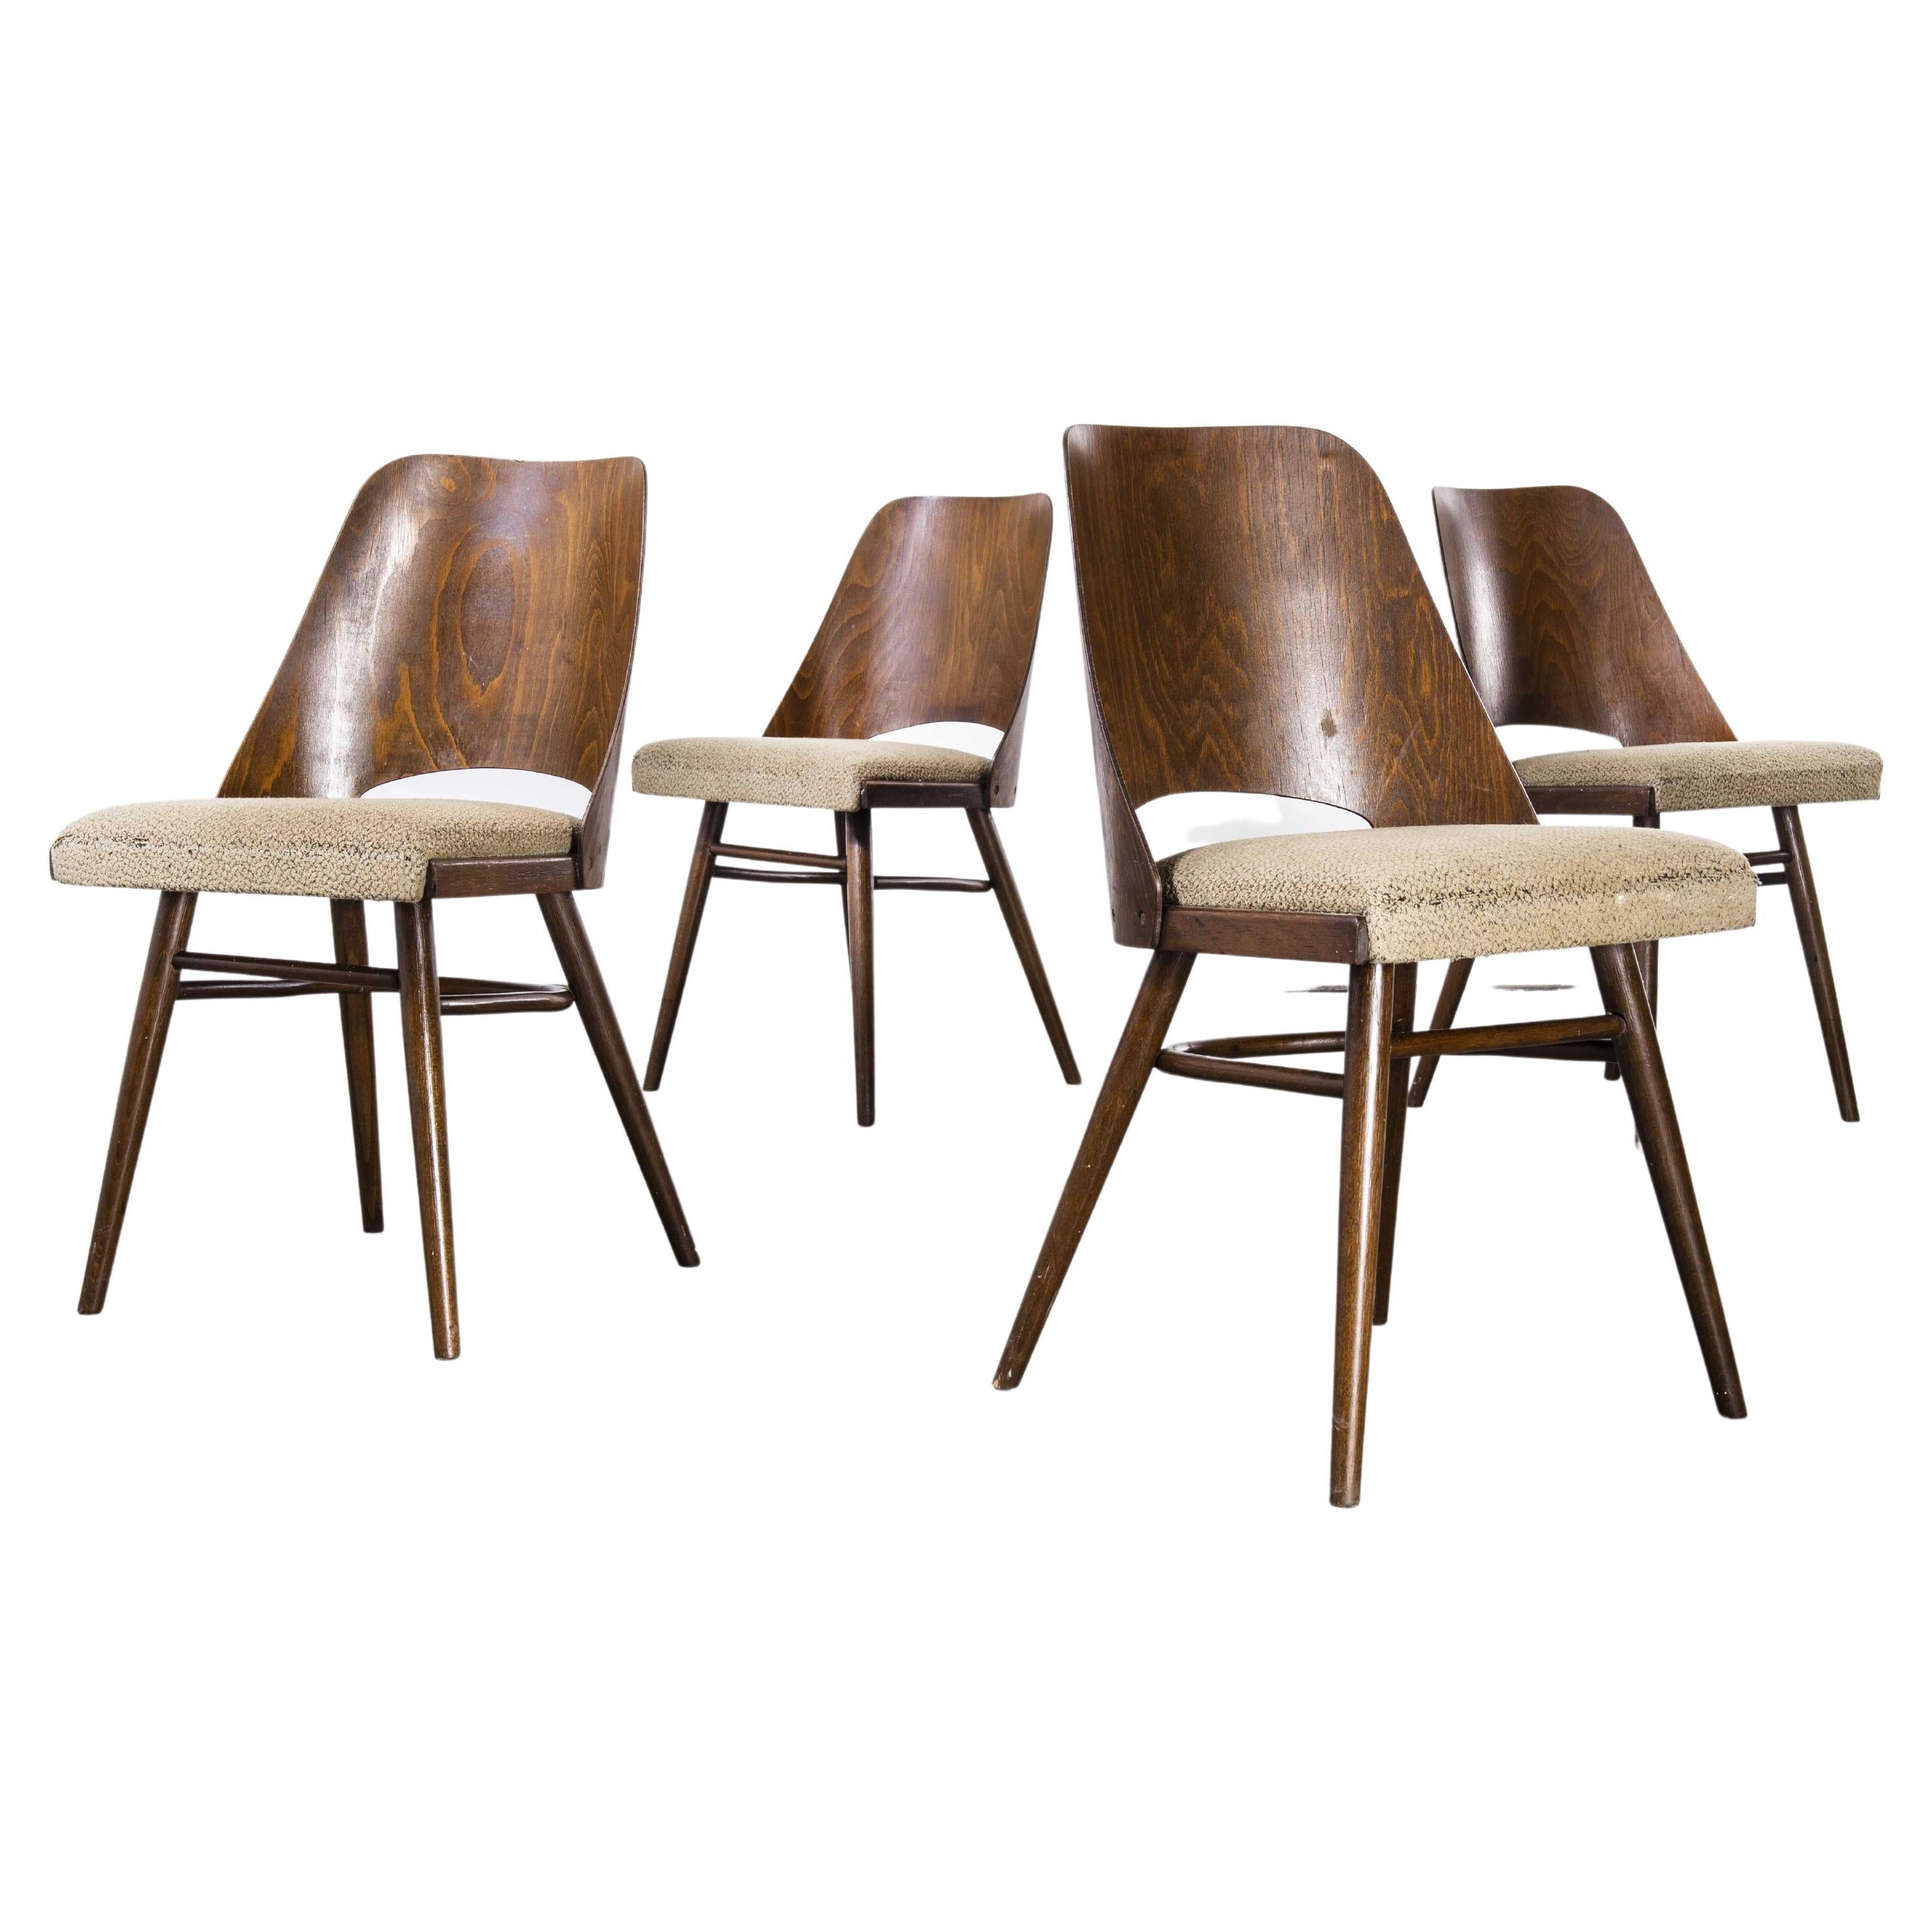 1950's Upholstered Thon Dining Chairs by Radomir Hoffman, Set of Four Dark Waln For Sale